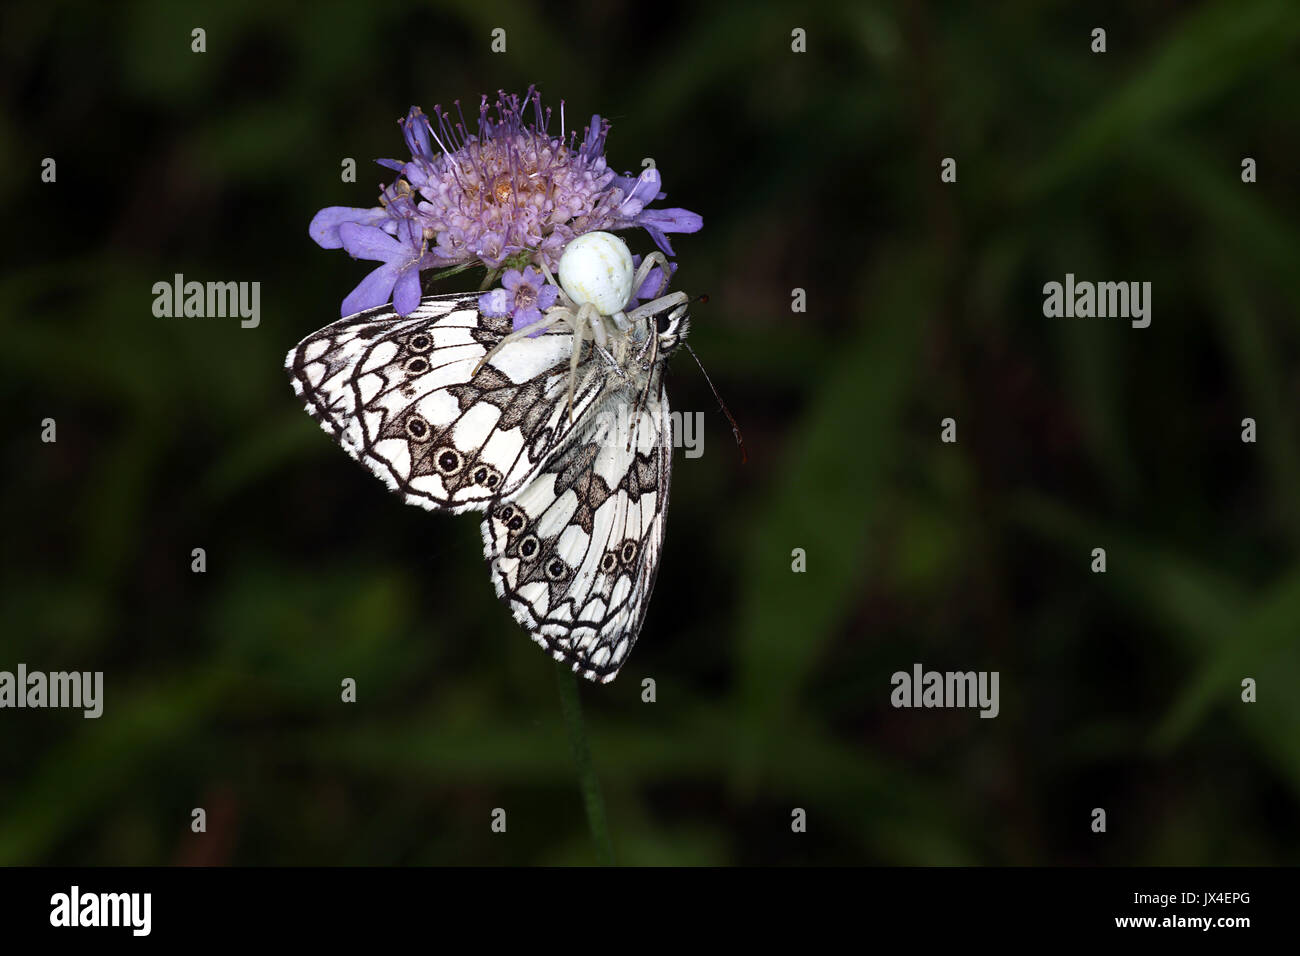 Crab Spider catching a Marbled White Butterfly Stock Photo